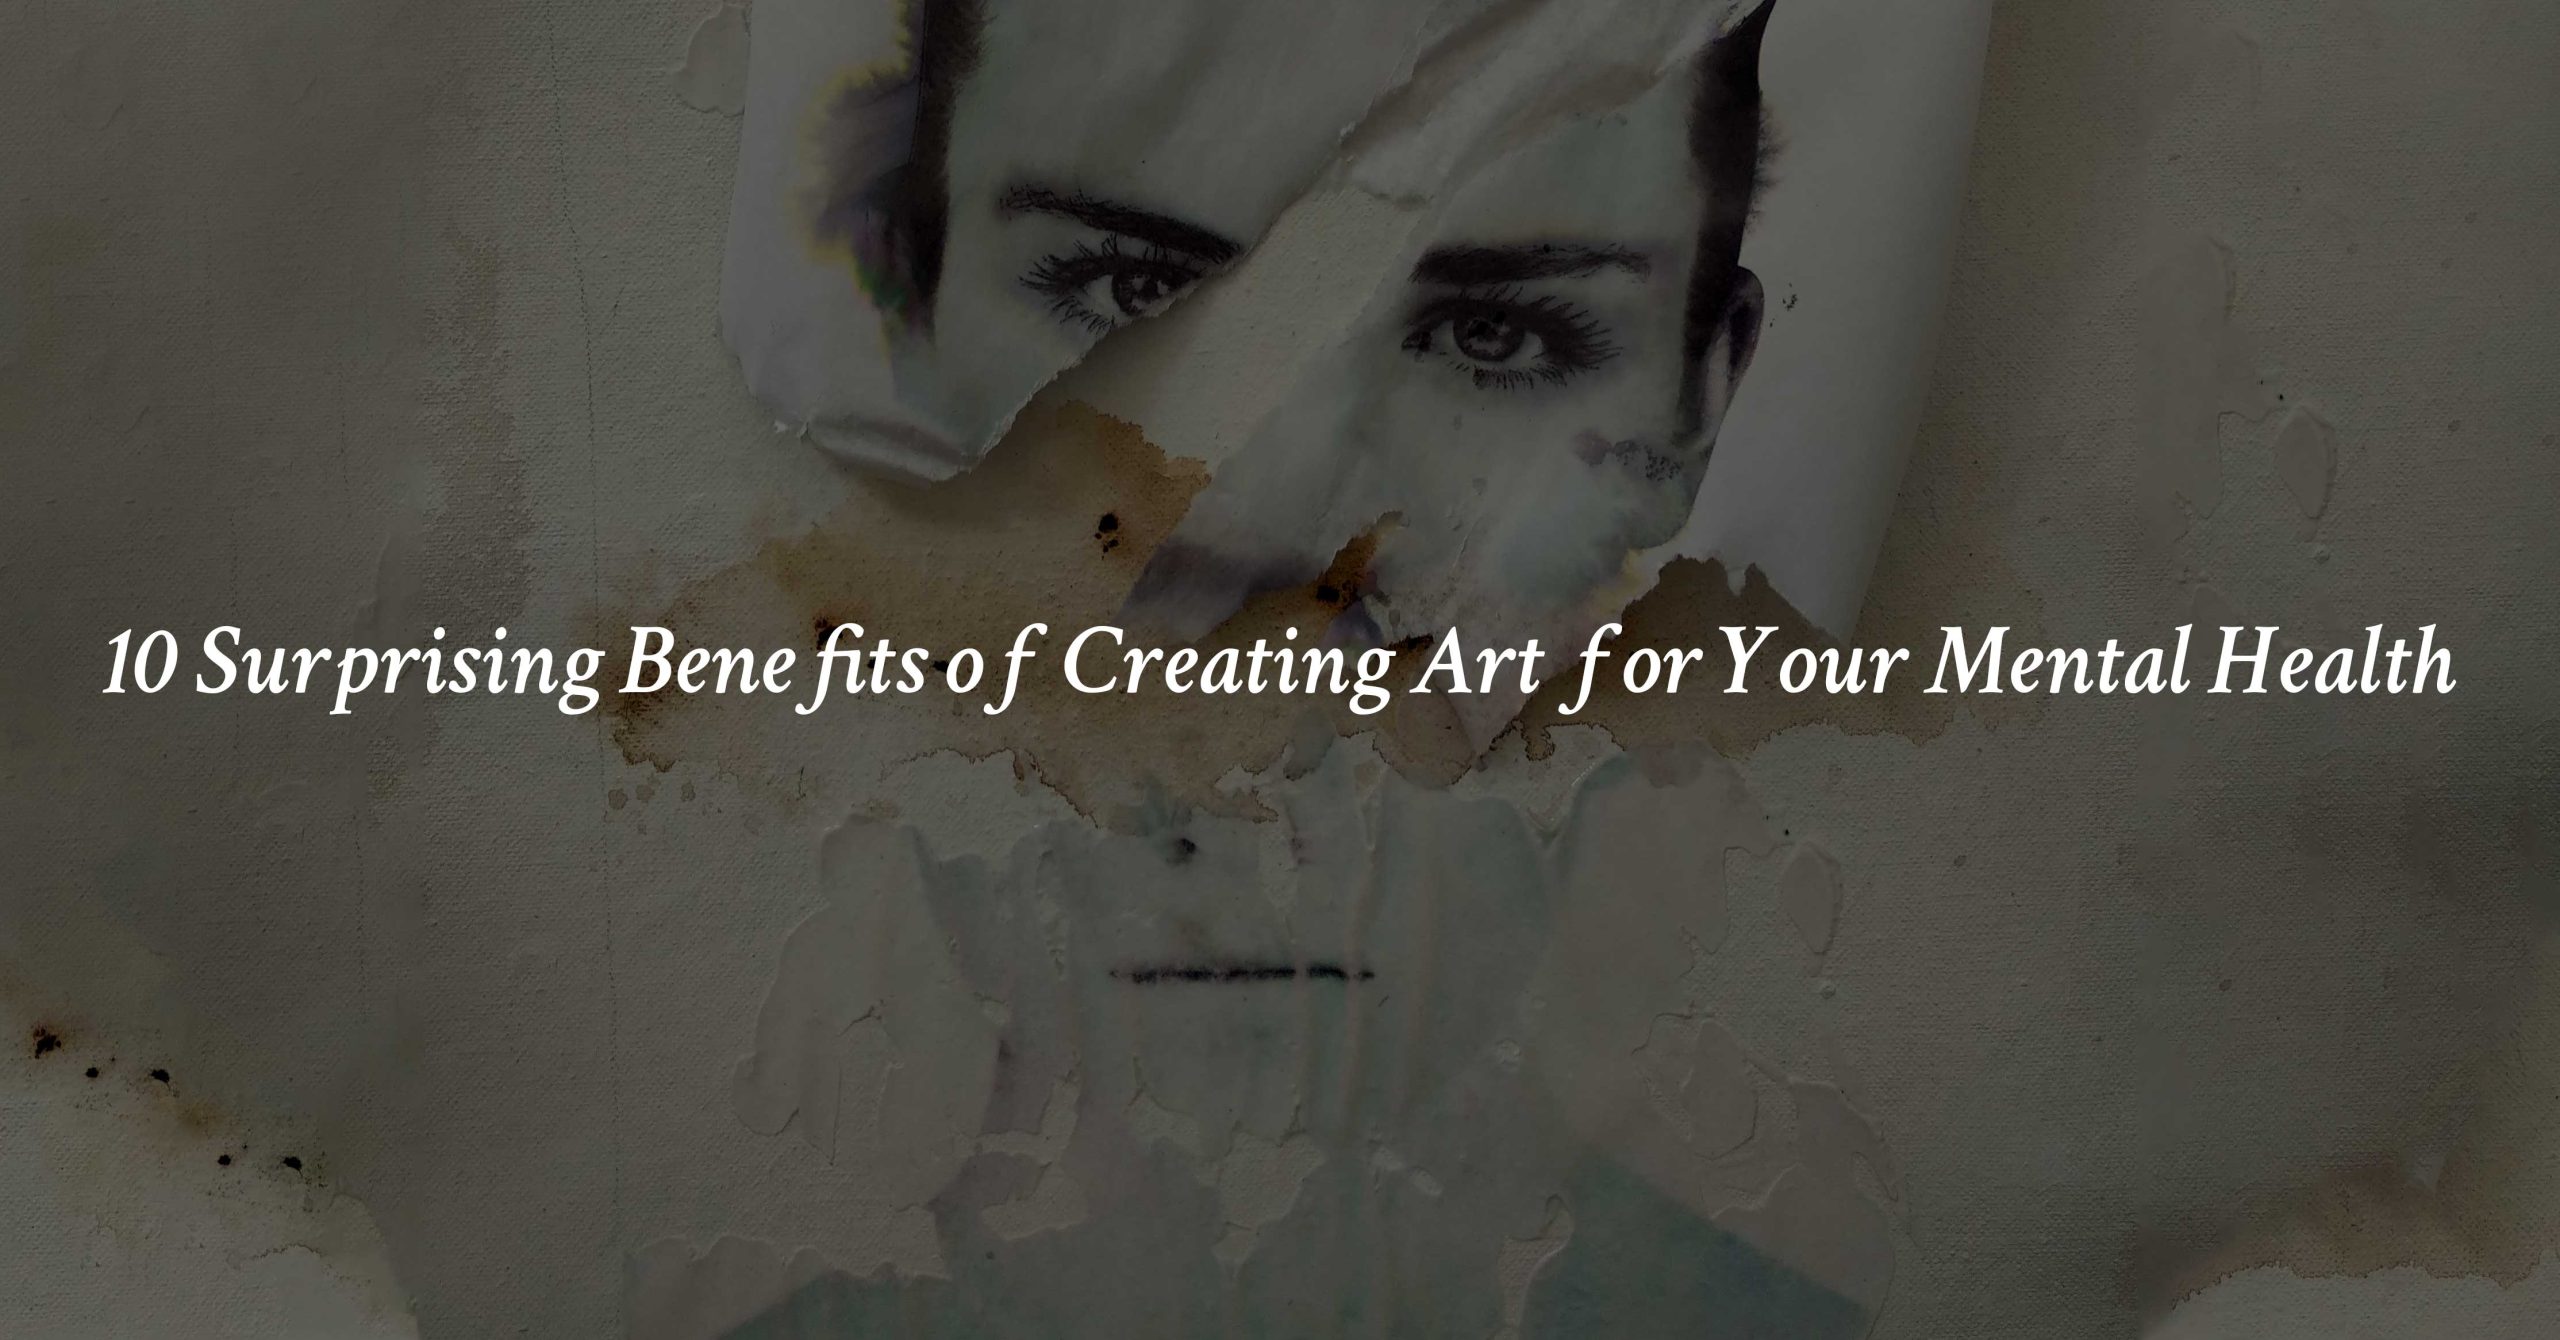 10 Surprising Benefits of Creating Art for Your Mental Health with text